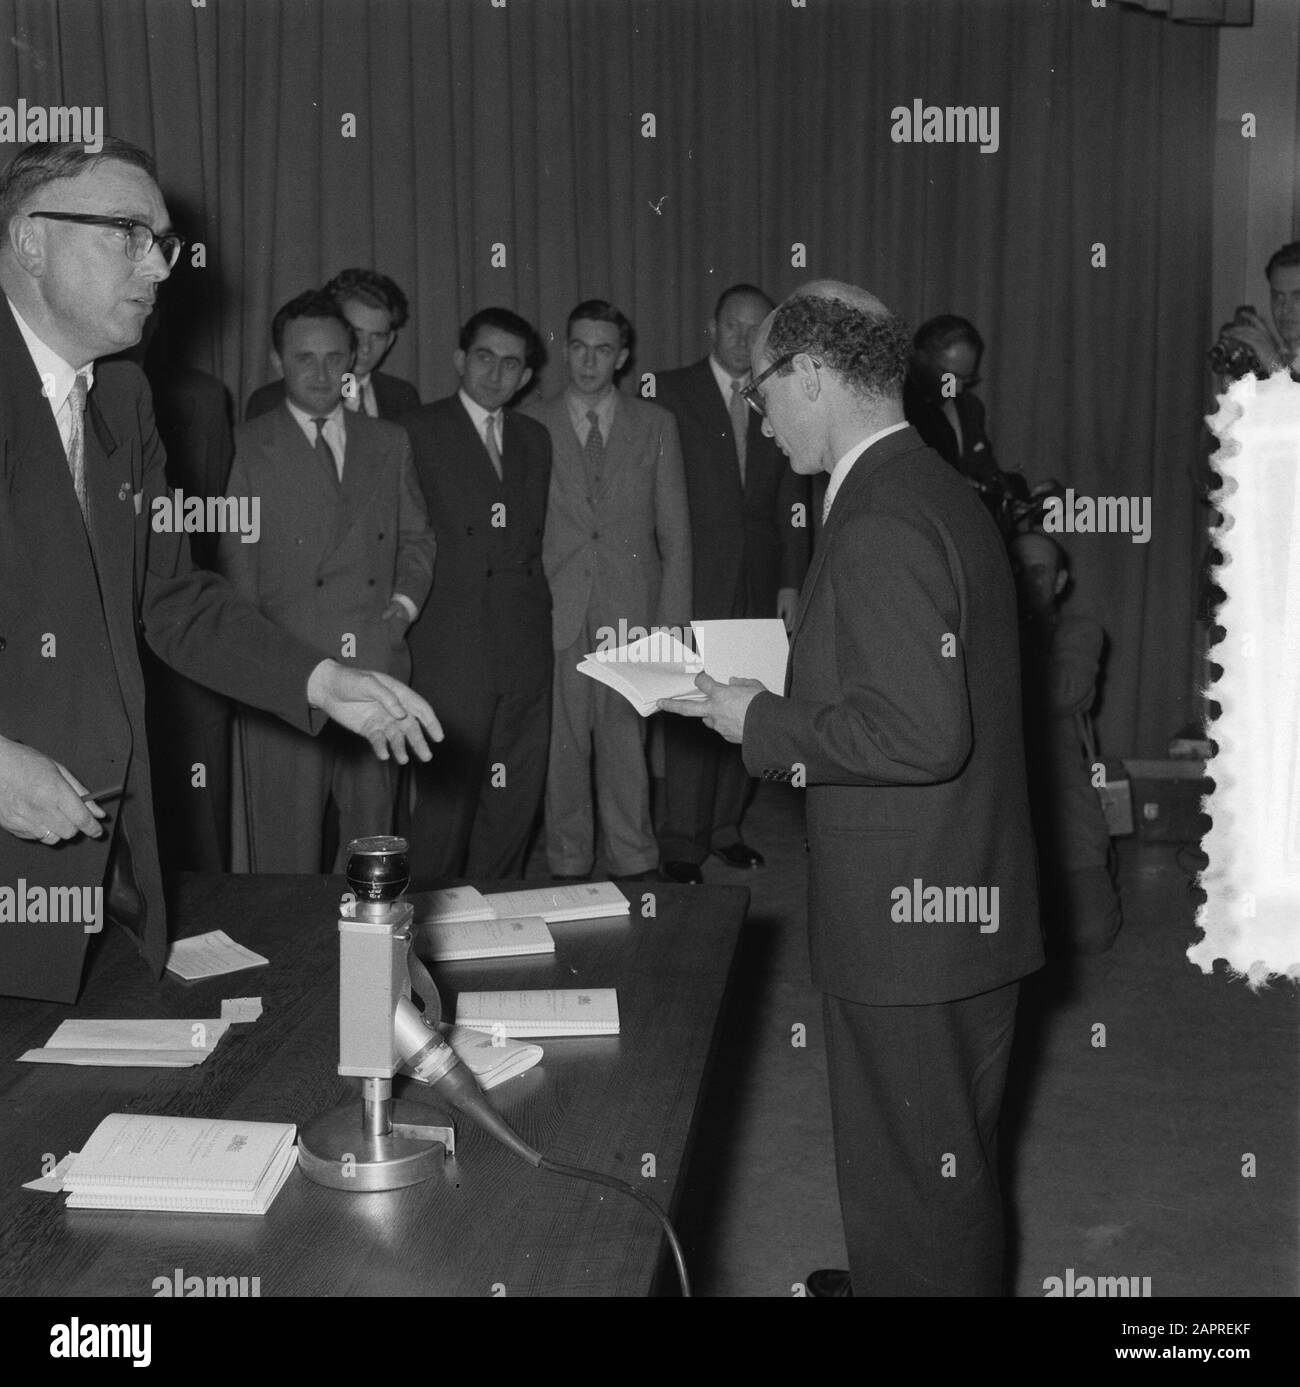 Loting World Chess Candidates Tournament Amsterdam Date: March 26, 1956 Location: Amsterdam, Noord-Holland Keywords: draws, chess Stock Photo